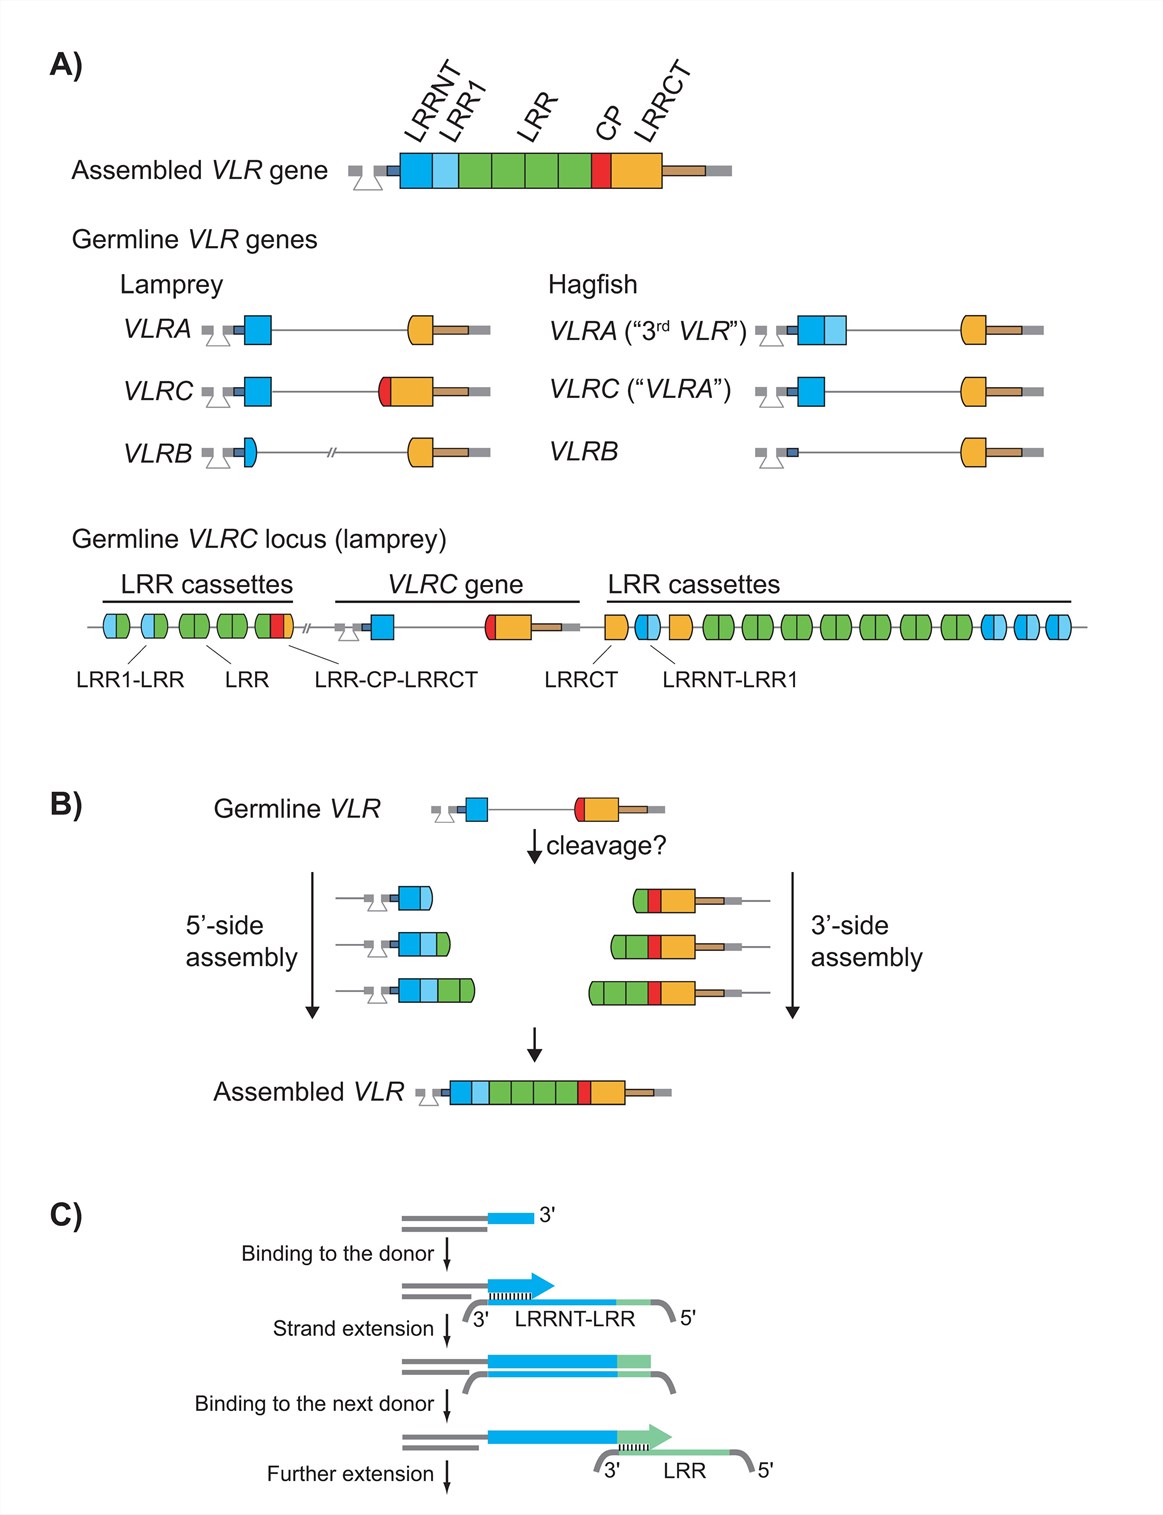 Organization of the germline VLR and gene assembly.